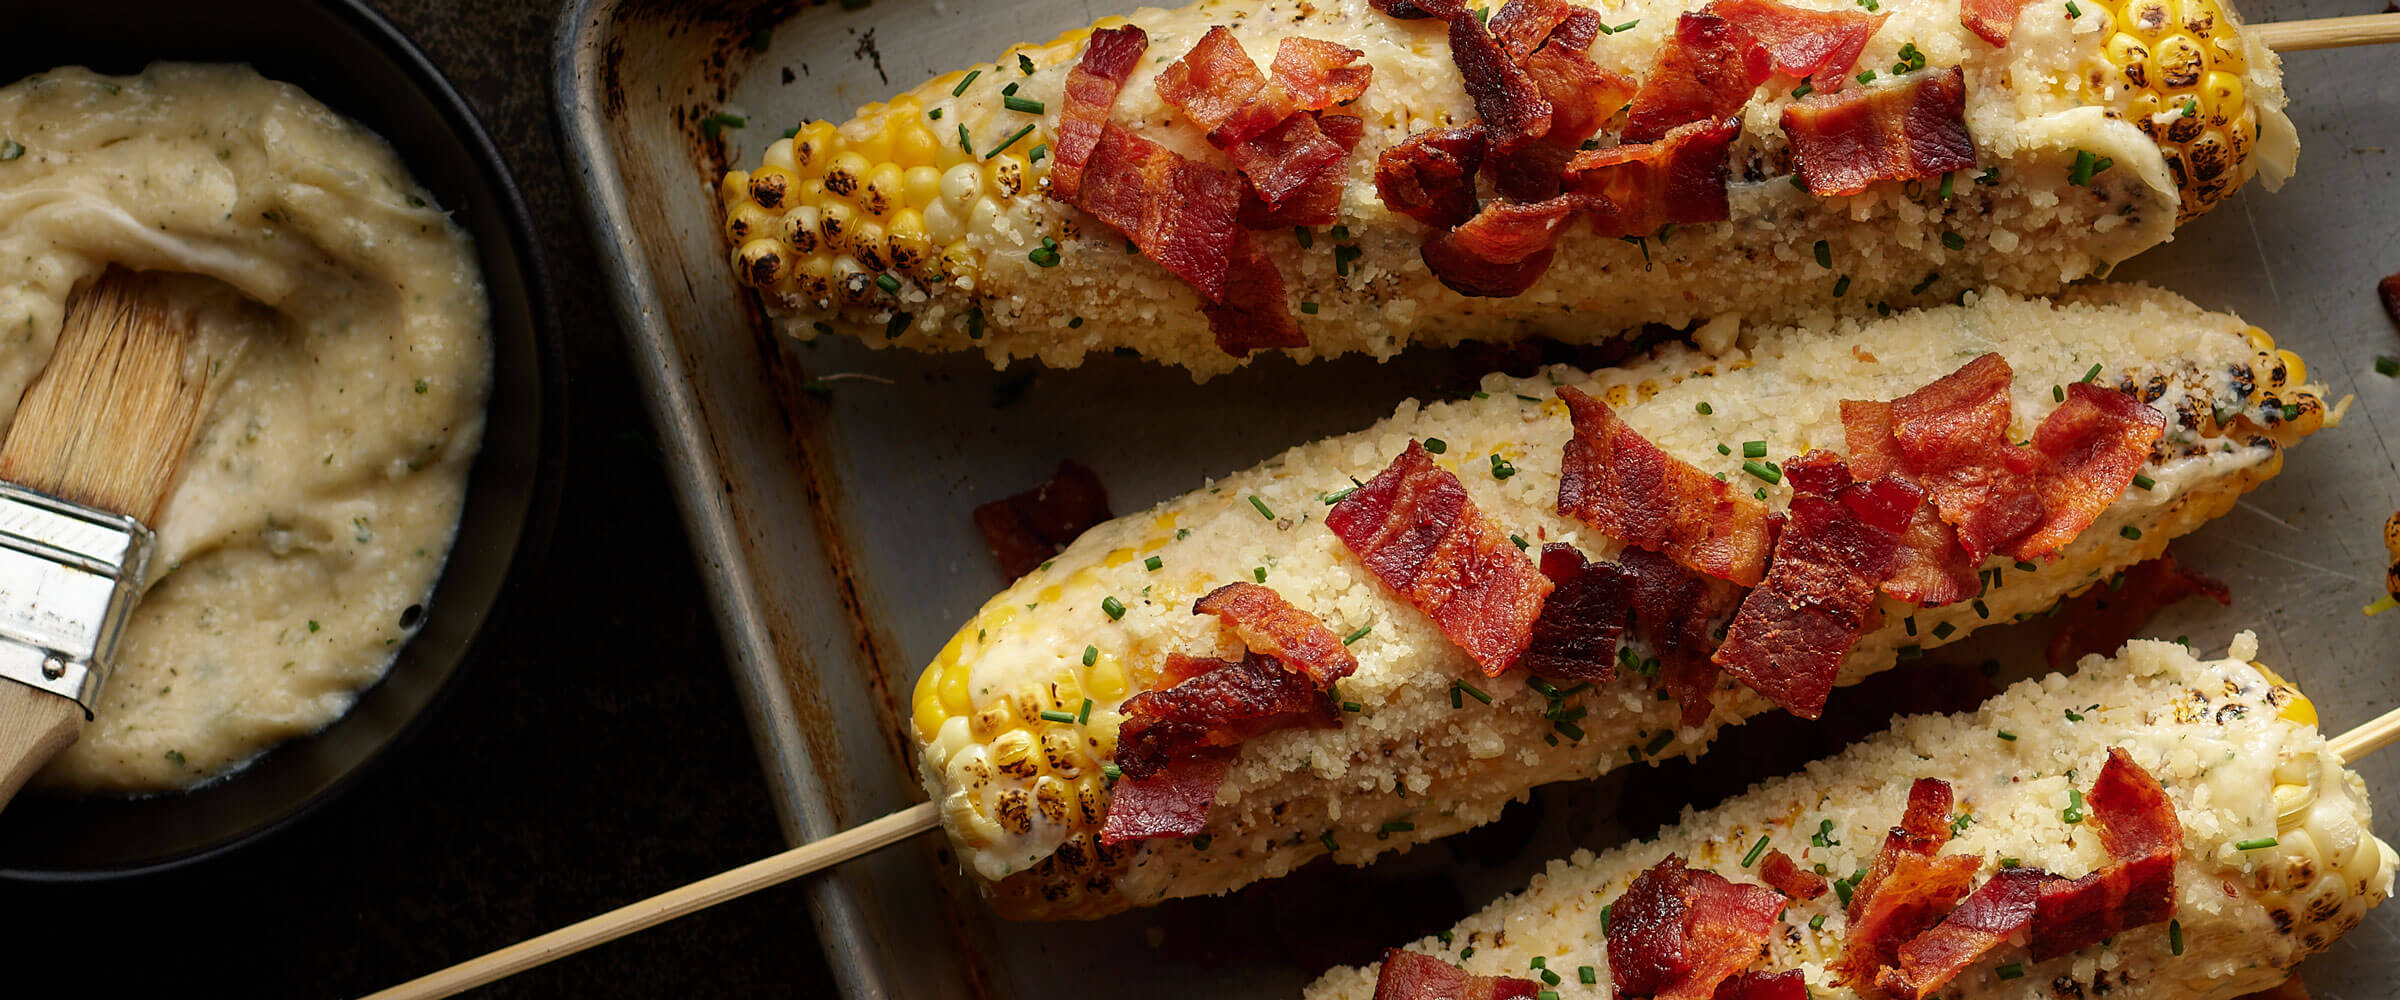 Bacon Mexican Street Corn on skewers on sheetpan